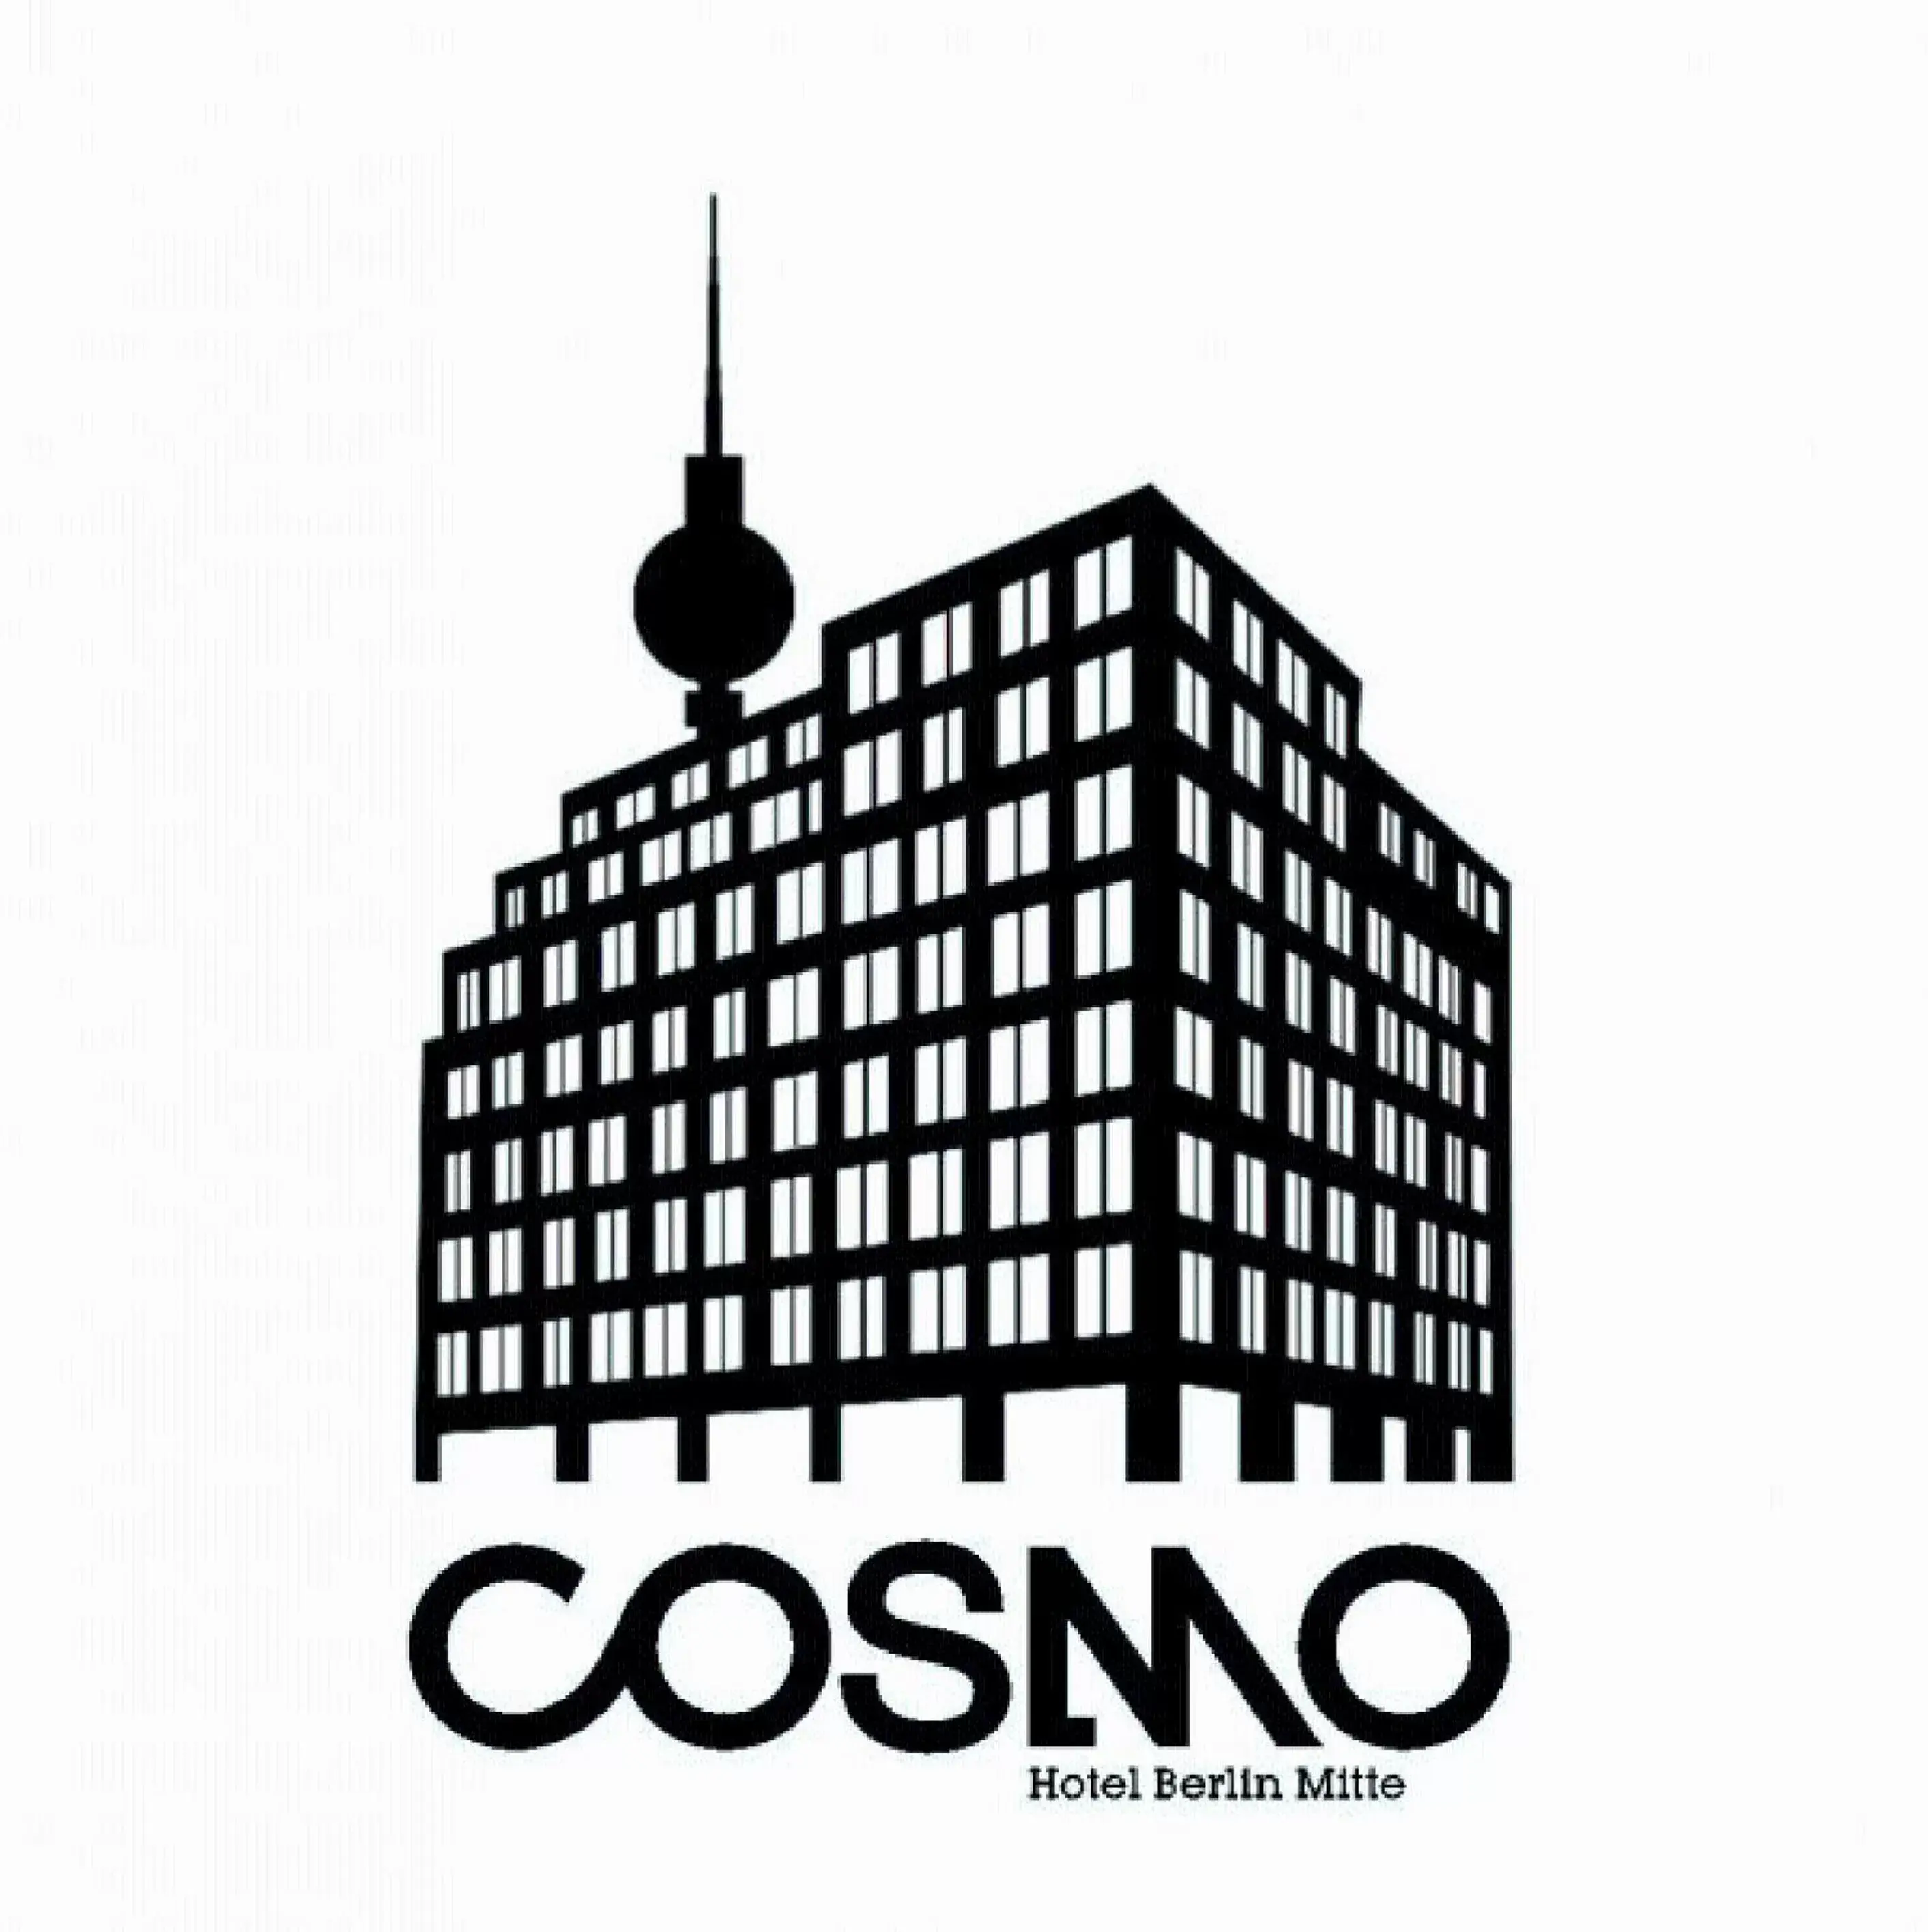 Property logo or sign in COSMO Hotel Berlin Mitte